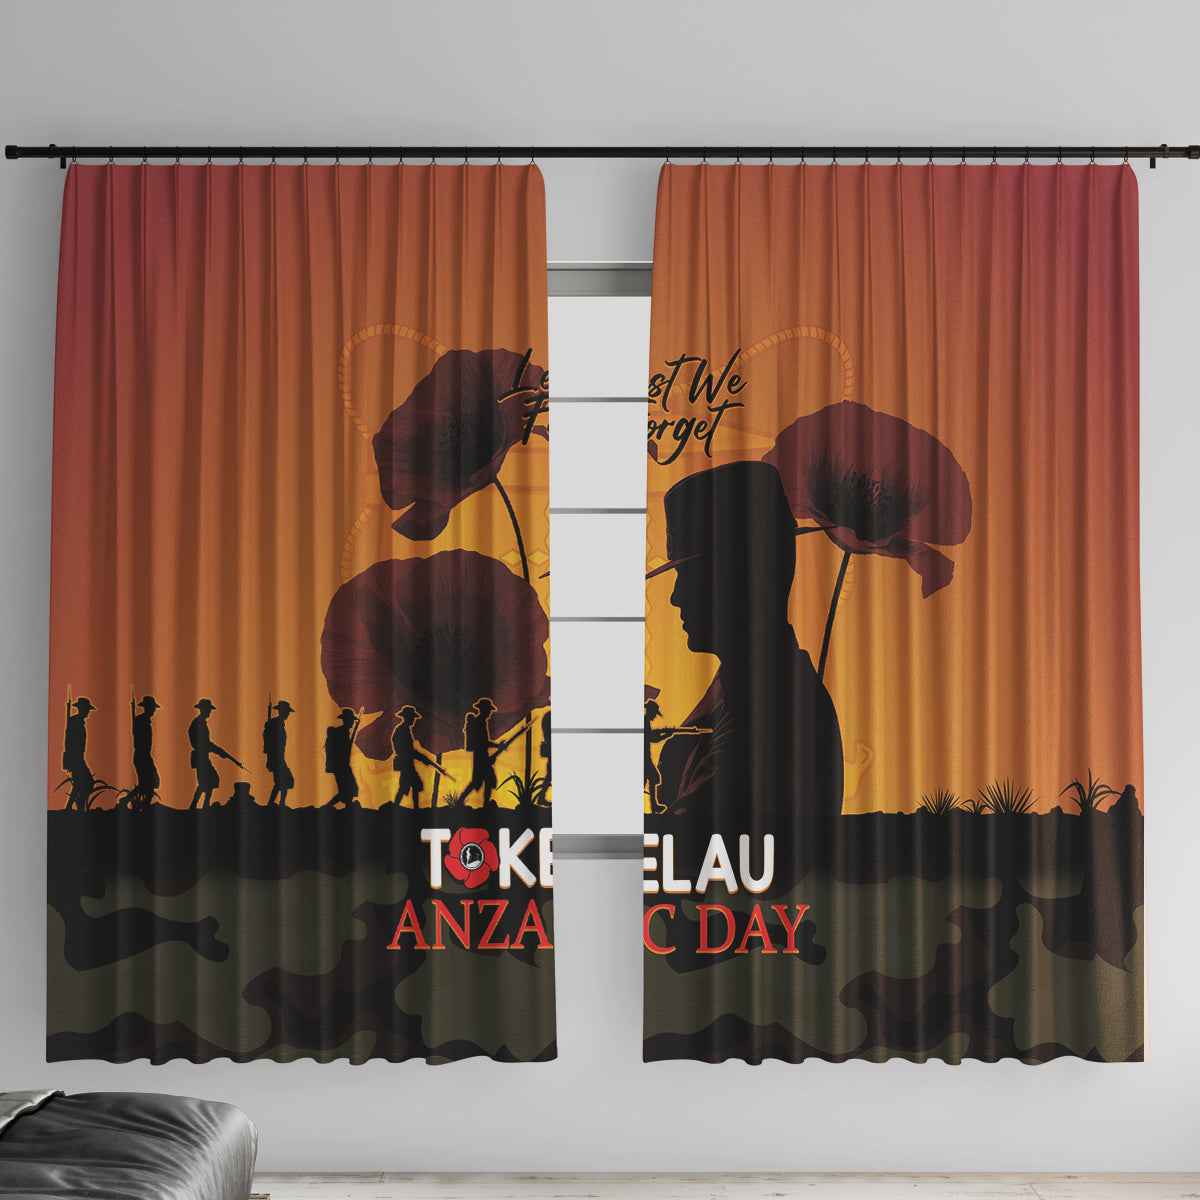 Tokelau ANZAC Day Window Curtain Camouflage With Poppies Lest We Forget LT14 With Hooks Yellow - Polynesian Pride